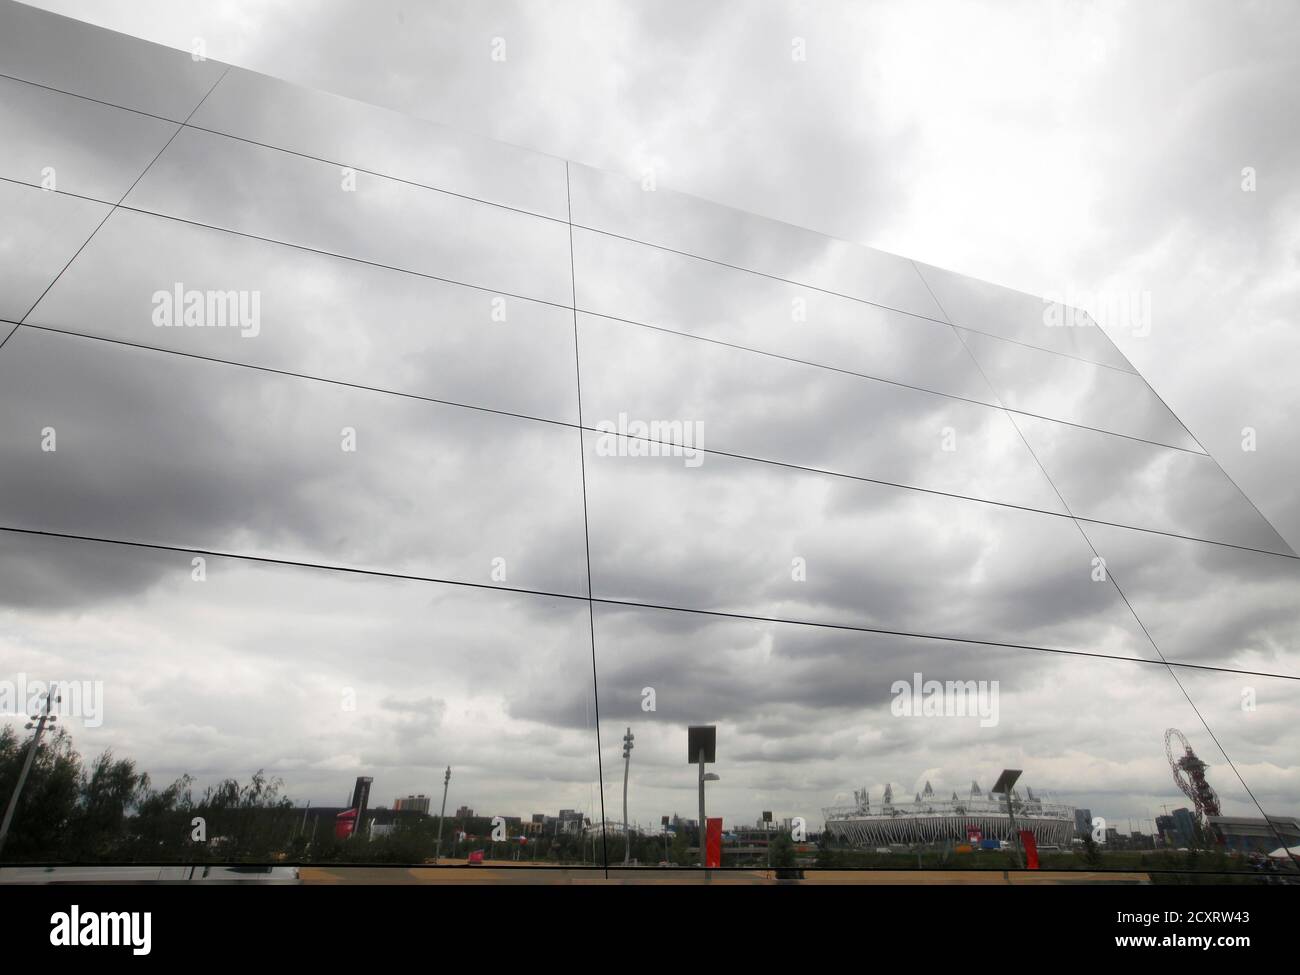 The Olympic Stadium is reflected in a corporate sponsor's pavilion in Olympic Park, Stratford, east London, July 19, 2012. The 2012 London Olympic Games will begin in just over a week.  REUTERS/Andrew Winning (BRITAIN - Tags: SPORT OLYMPICS) Stock Photo